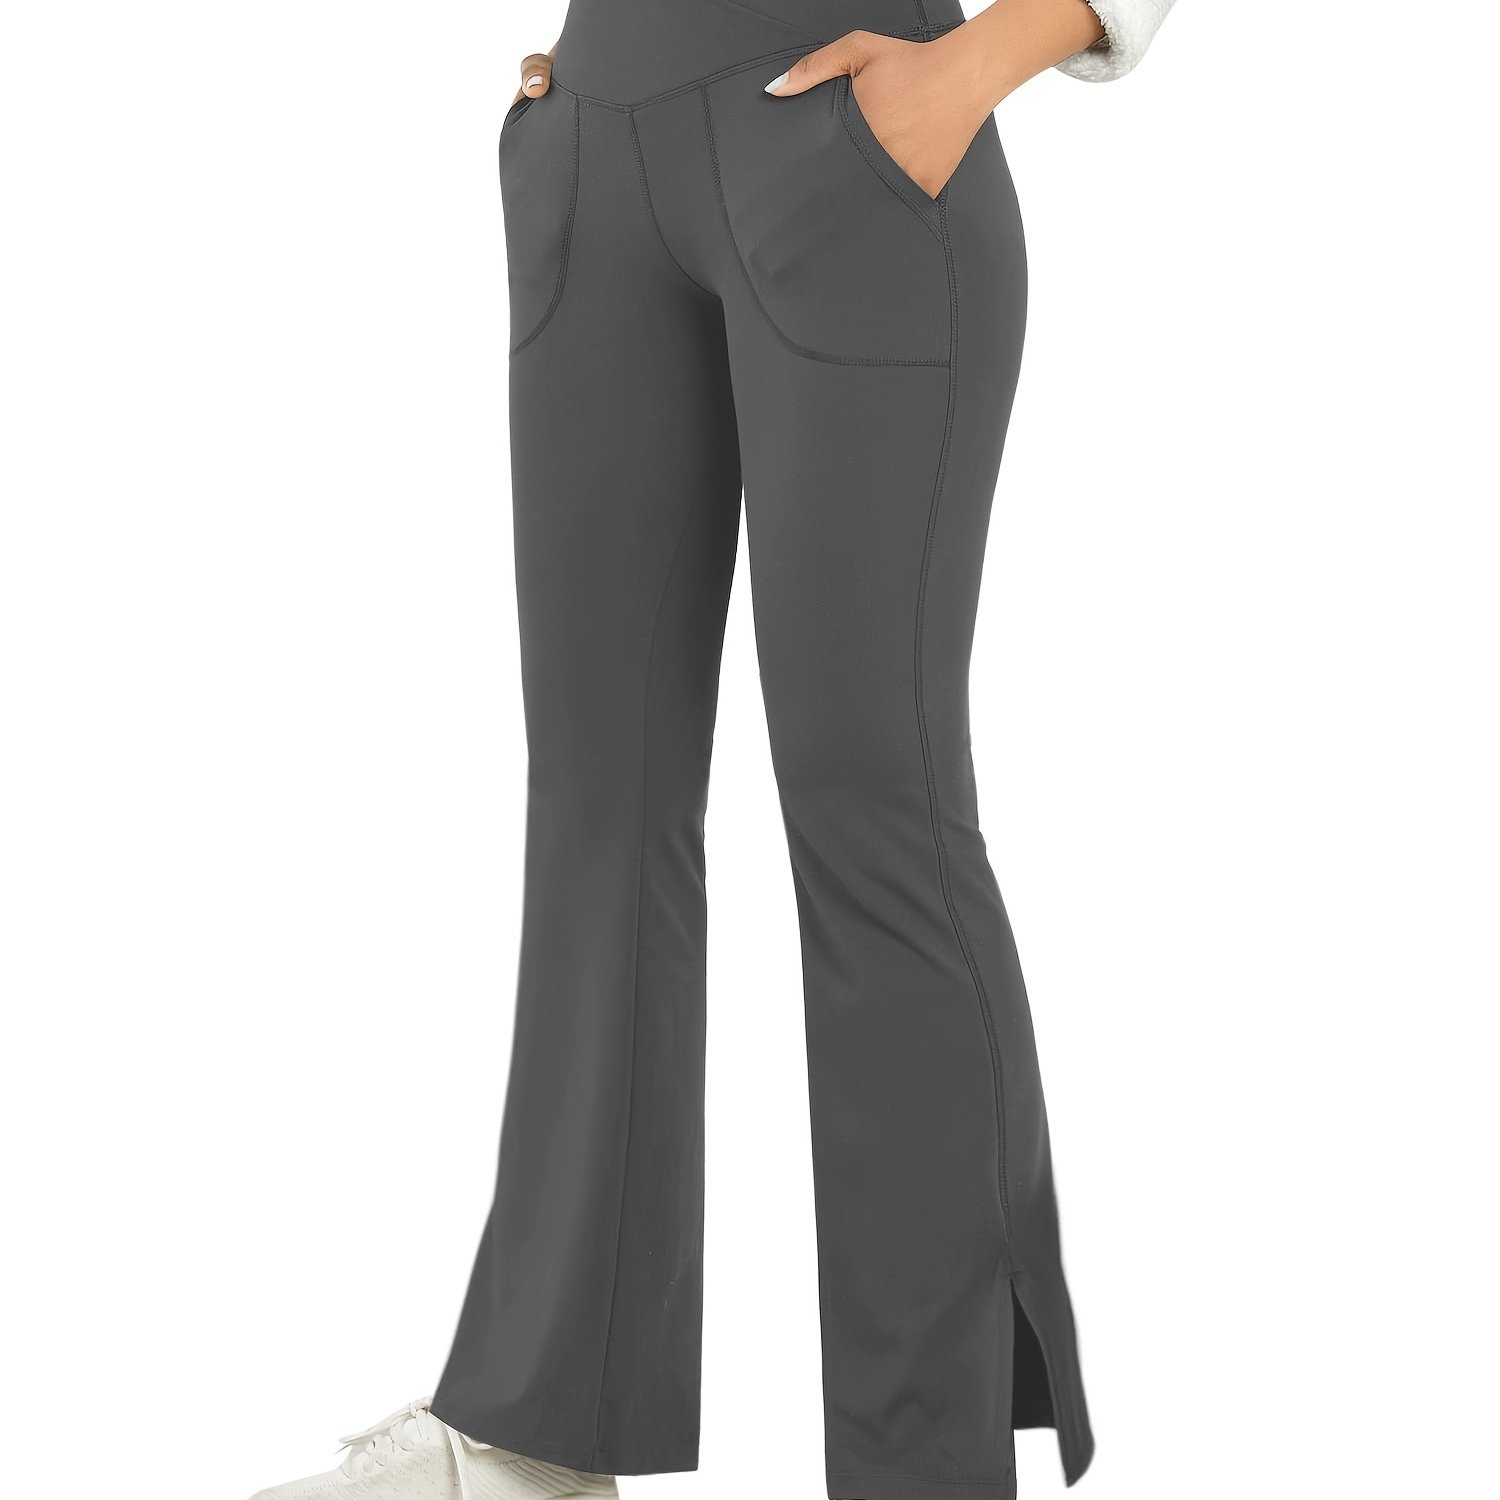 YDKZYMD Womens Cargo Pants with Pockets High Waisted Wide Legs Crossover  Yoga Palazzo Trousers Flowy Workout Casual Relaxed Flowy Pants with Pockets